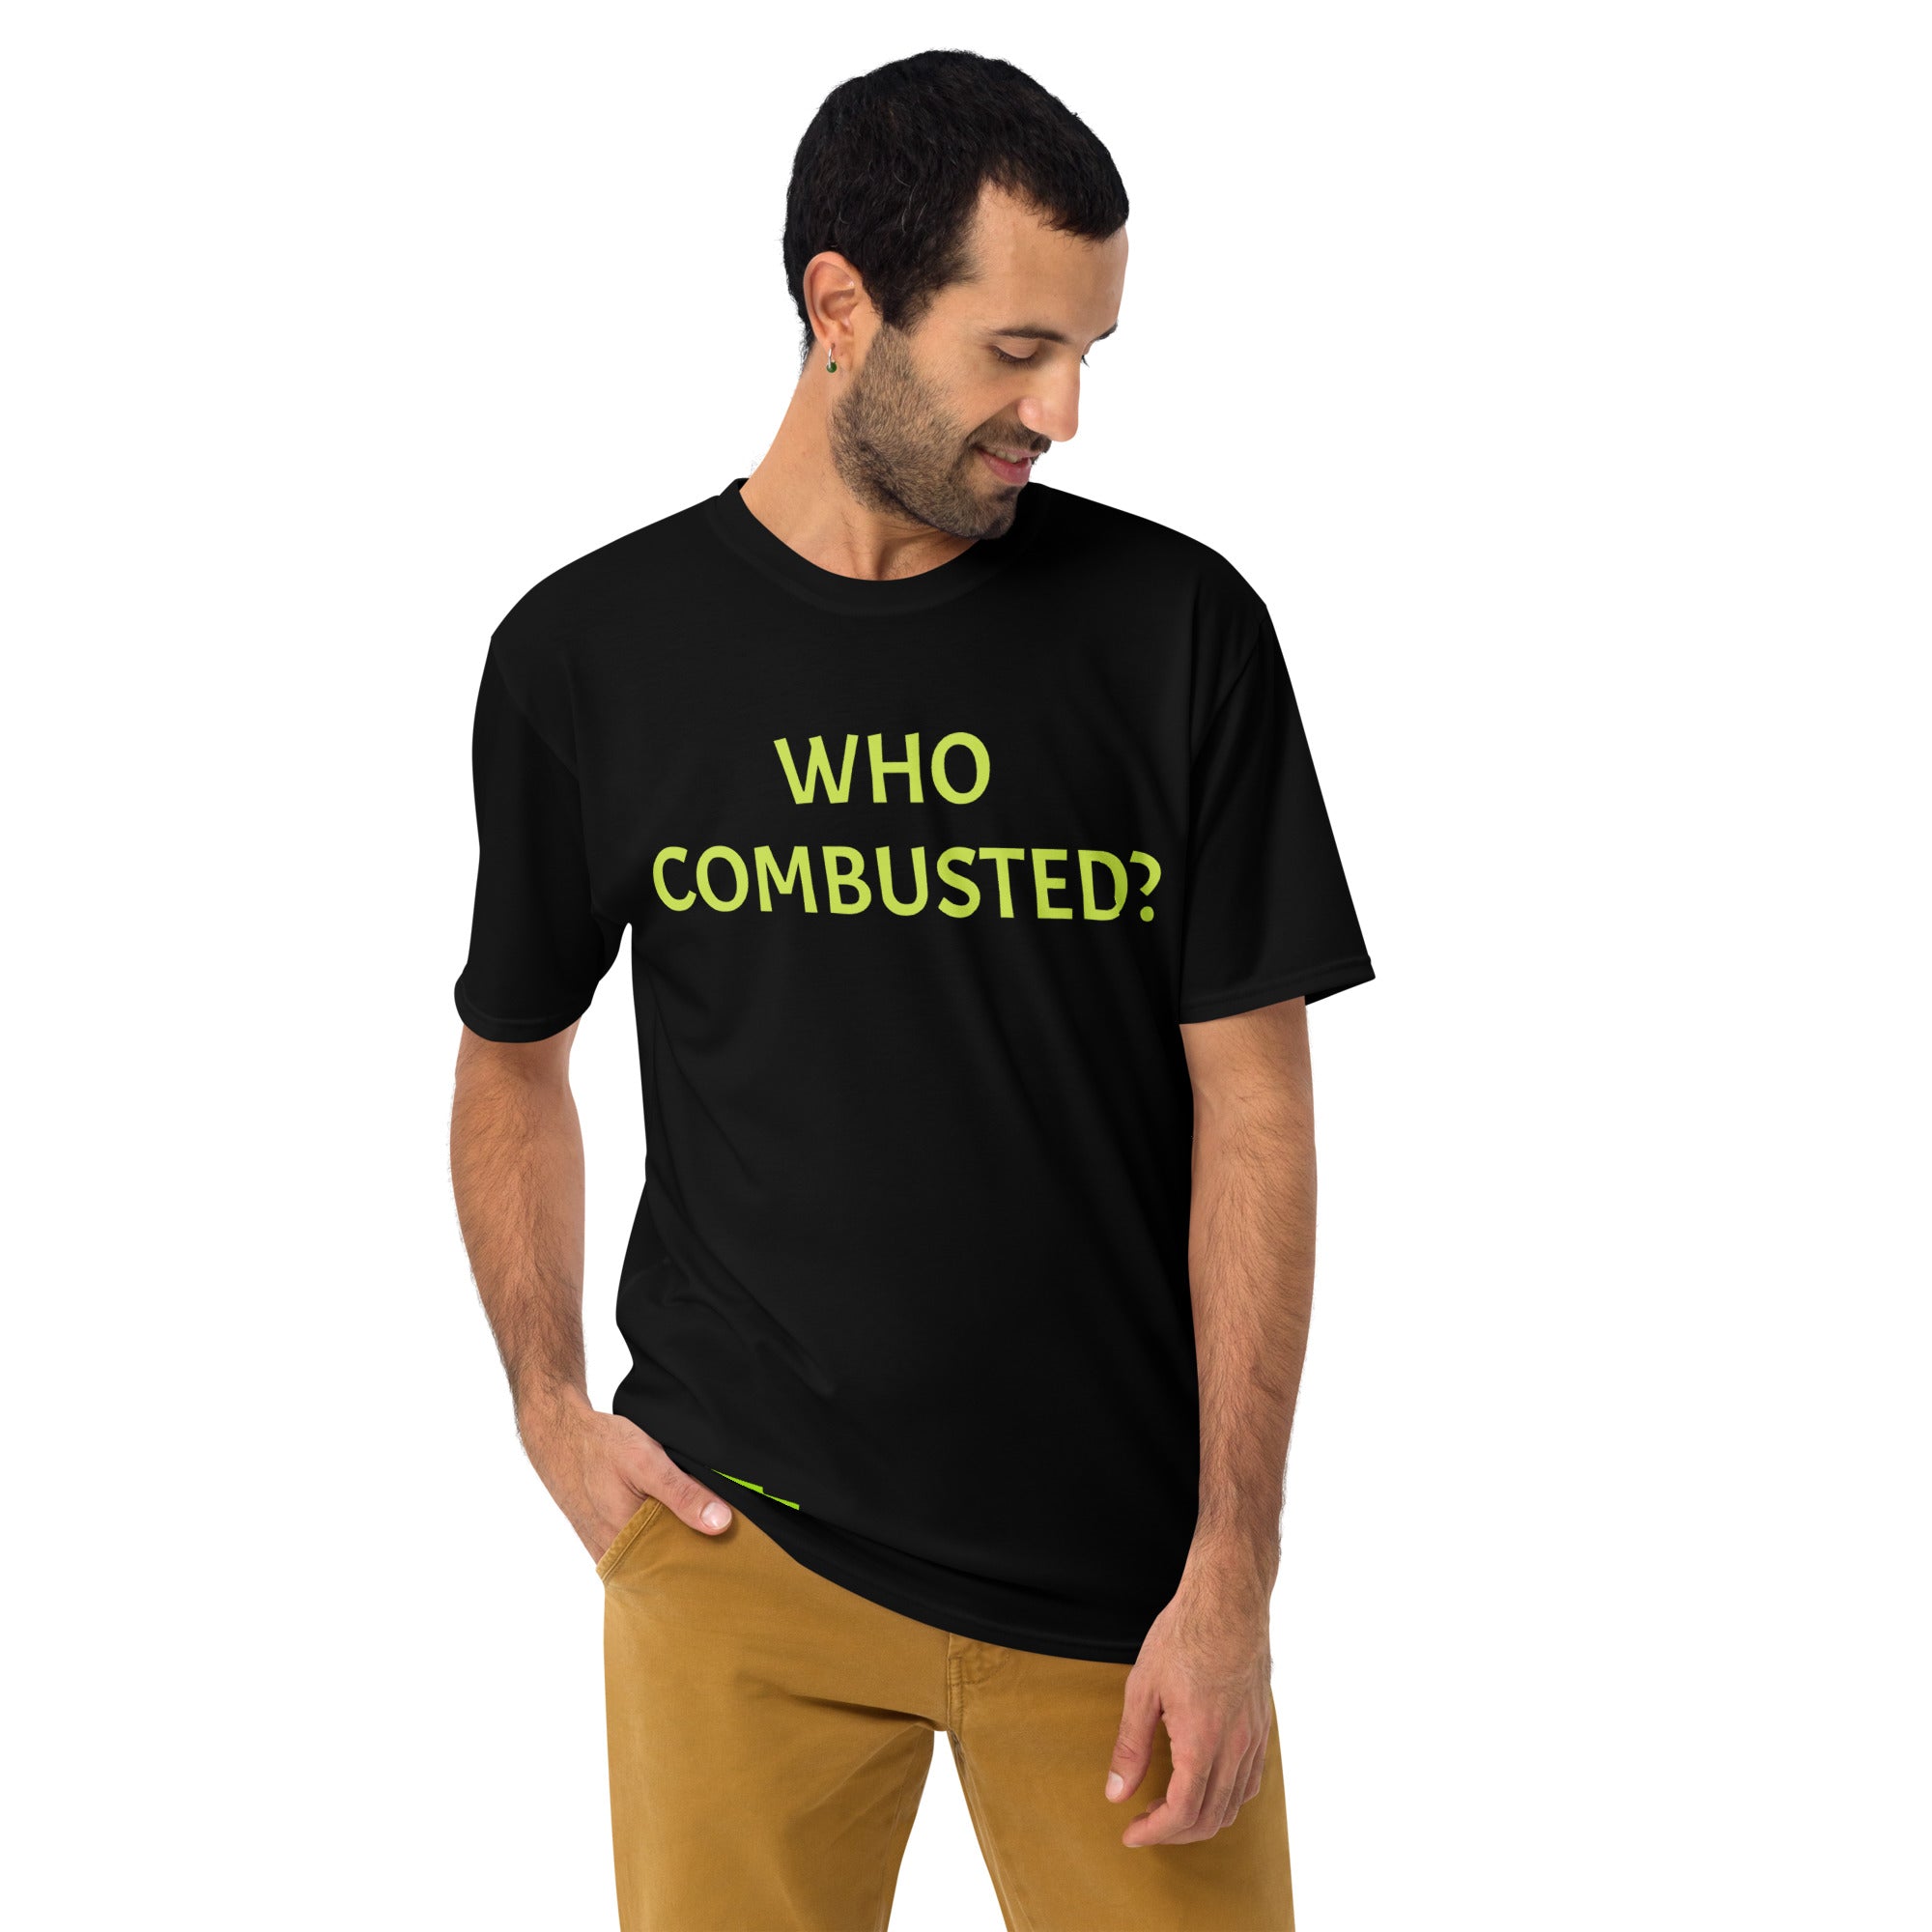 T-Shirt: Who Combusted?